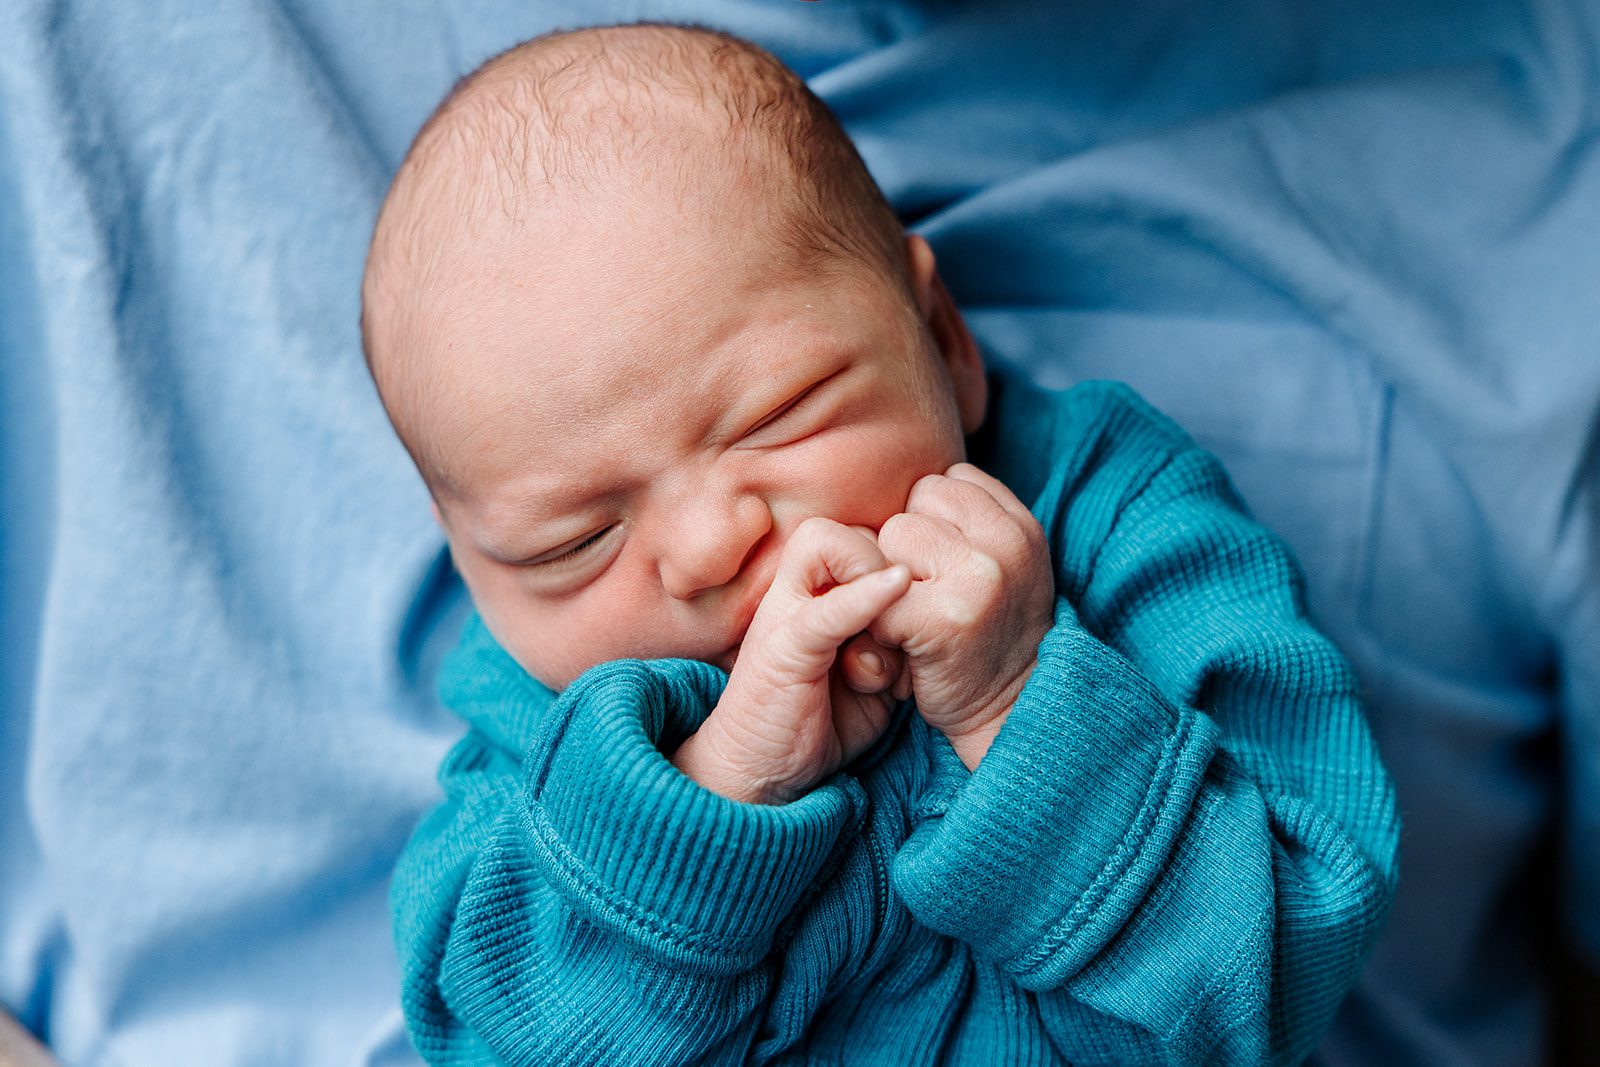 photo of newborn baby boy with fists squished up to his mouth